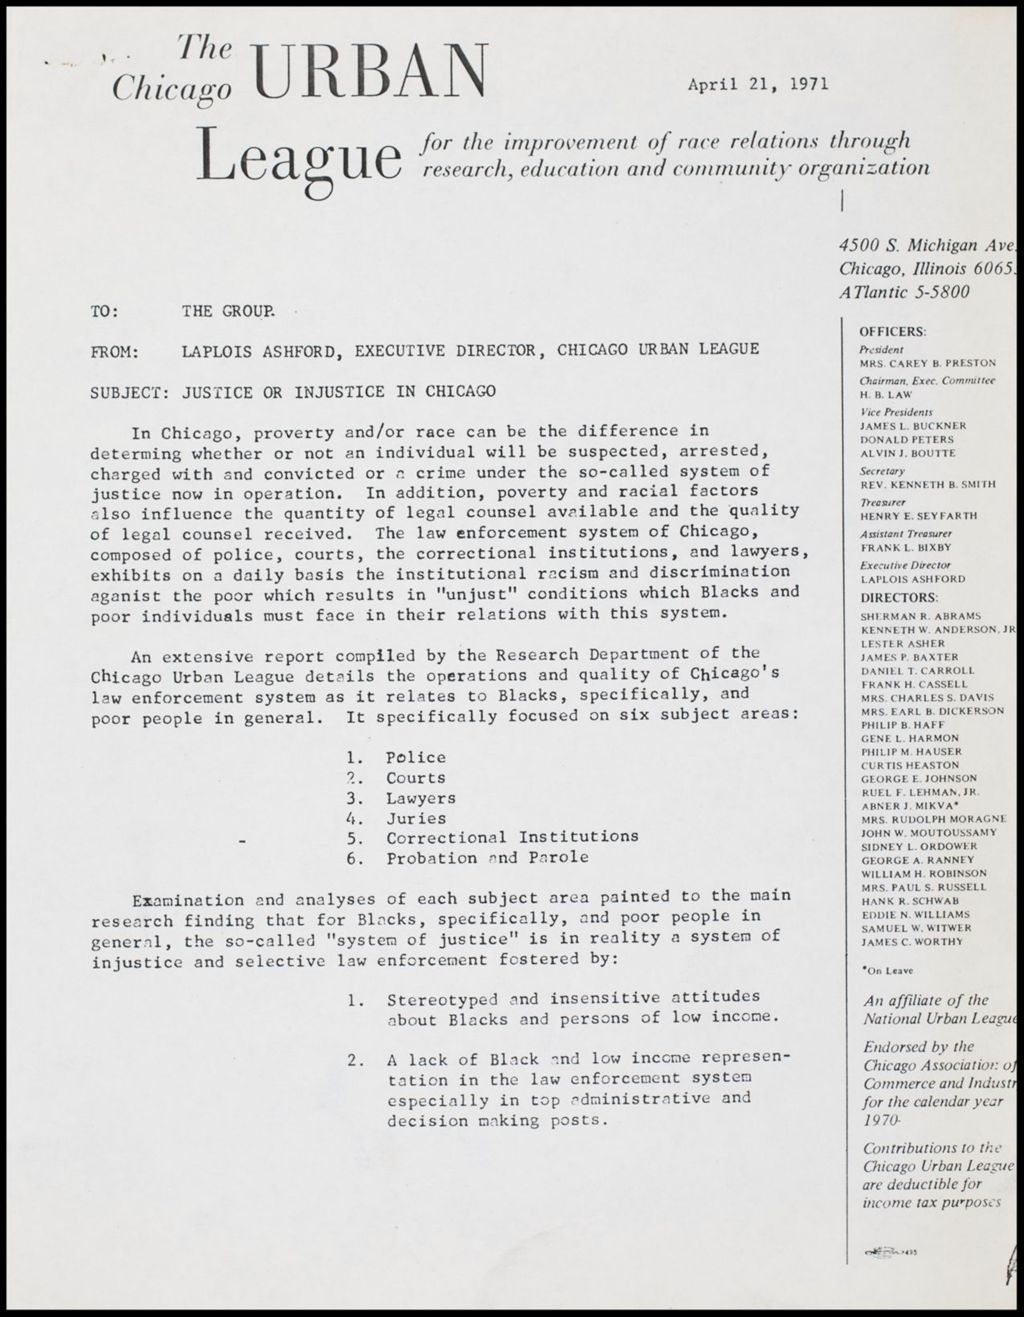 Miniature of Race Relations and Law Enforcement Reports, 1971 (Folder III-1884)